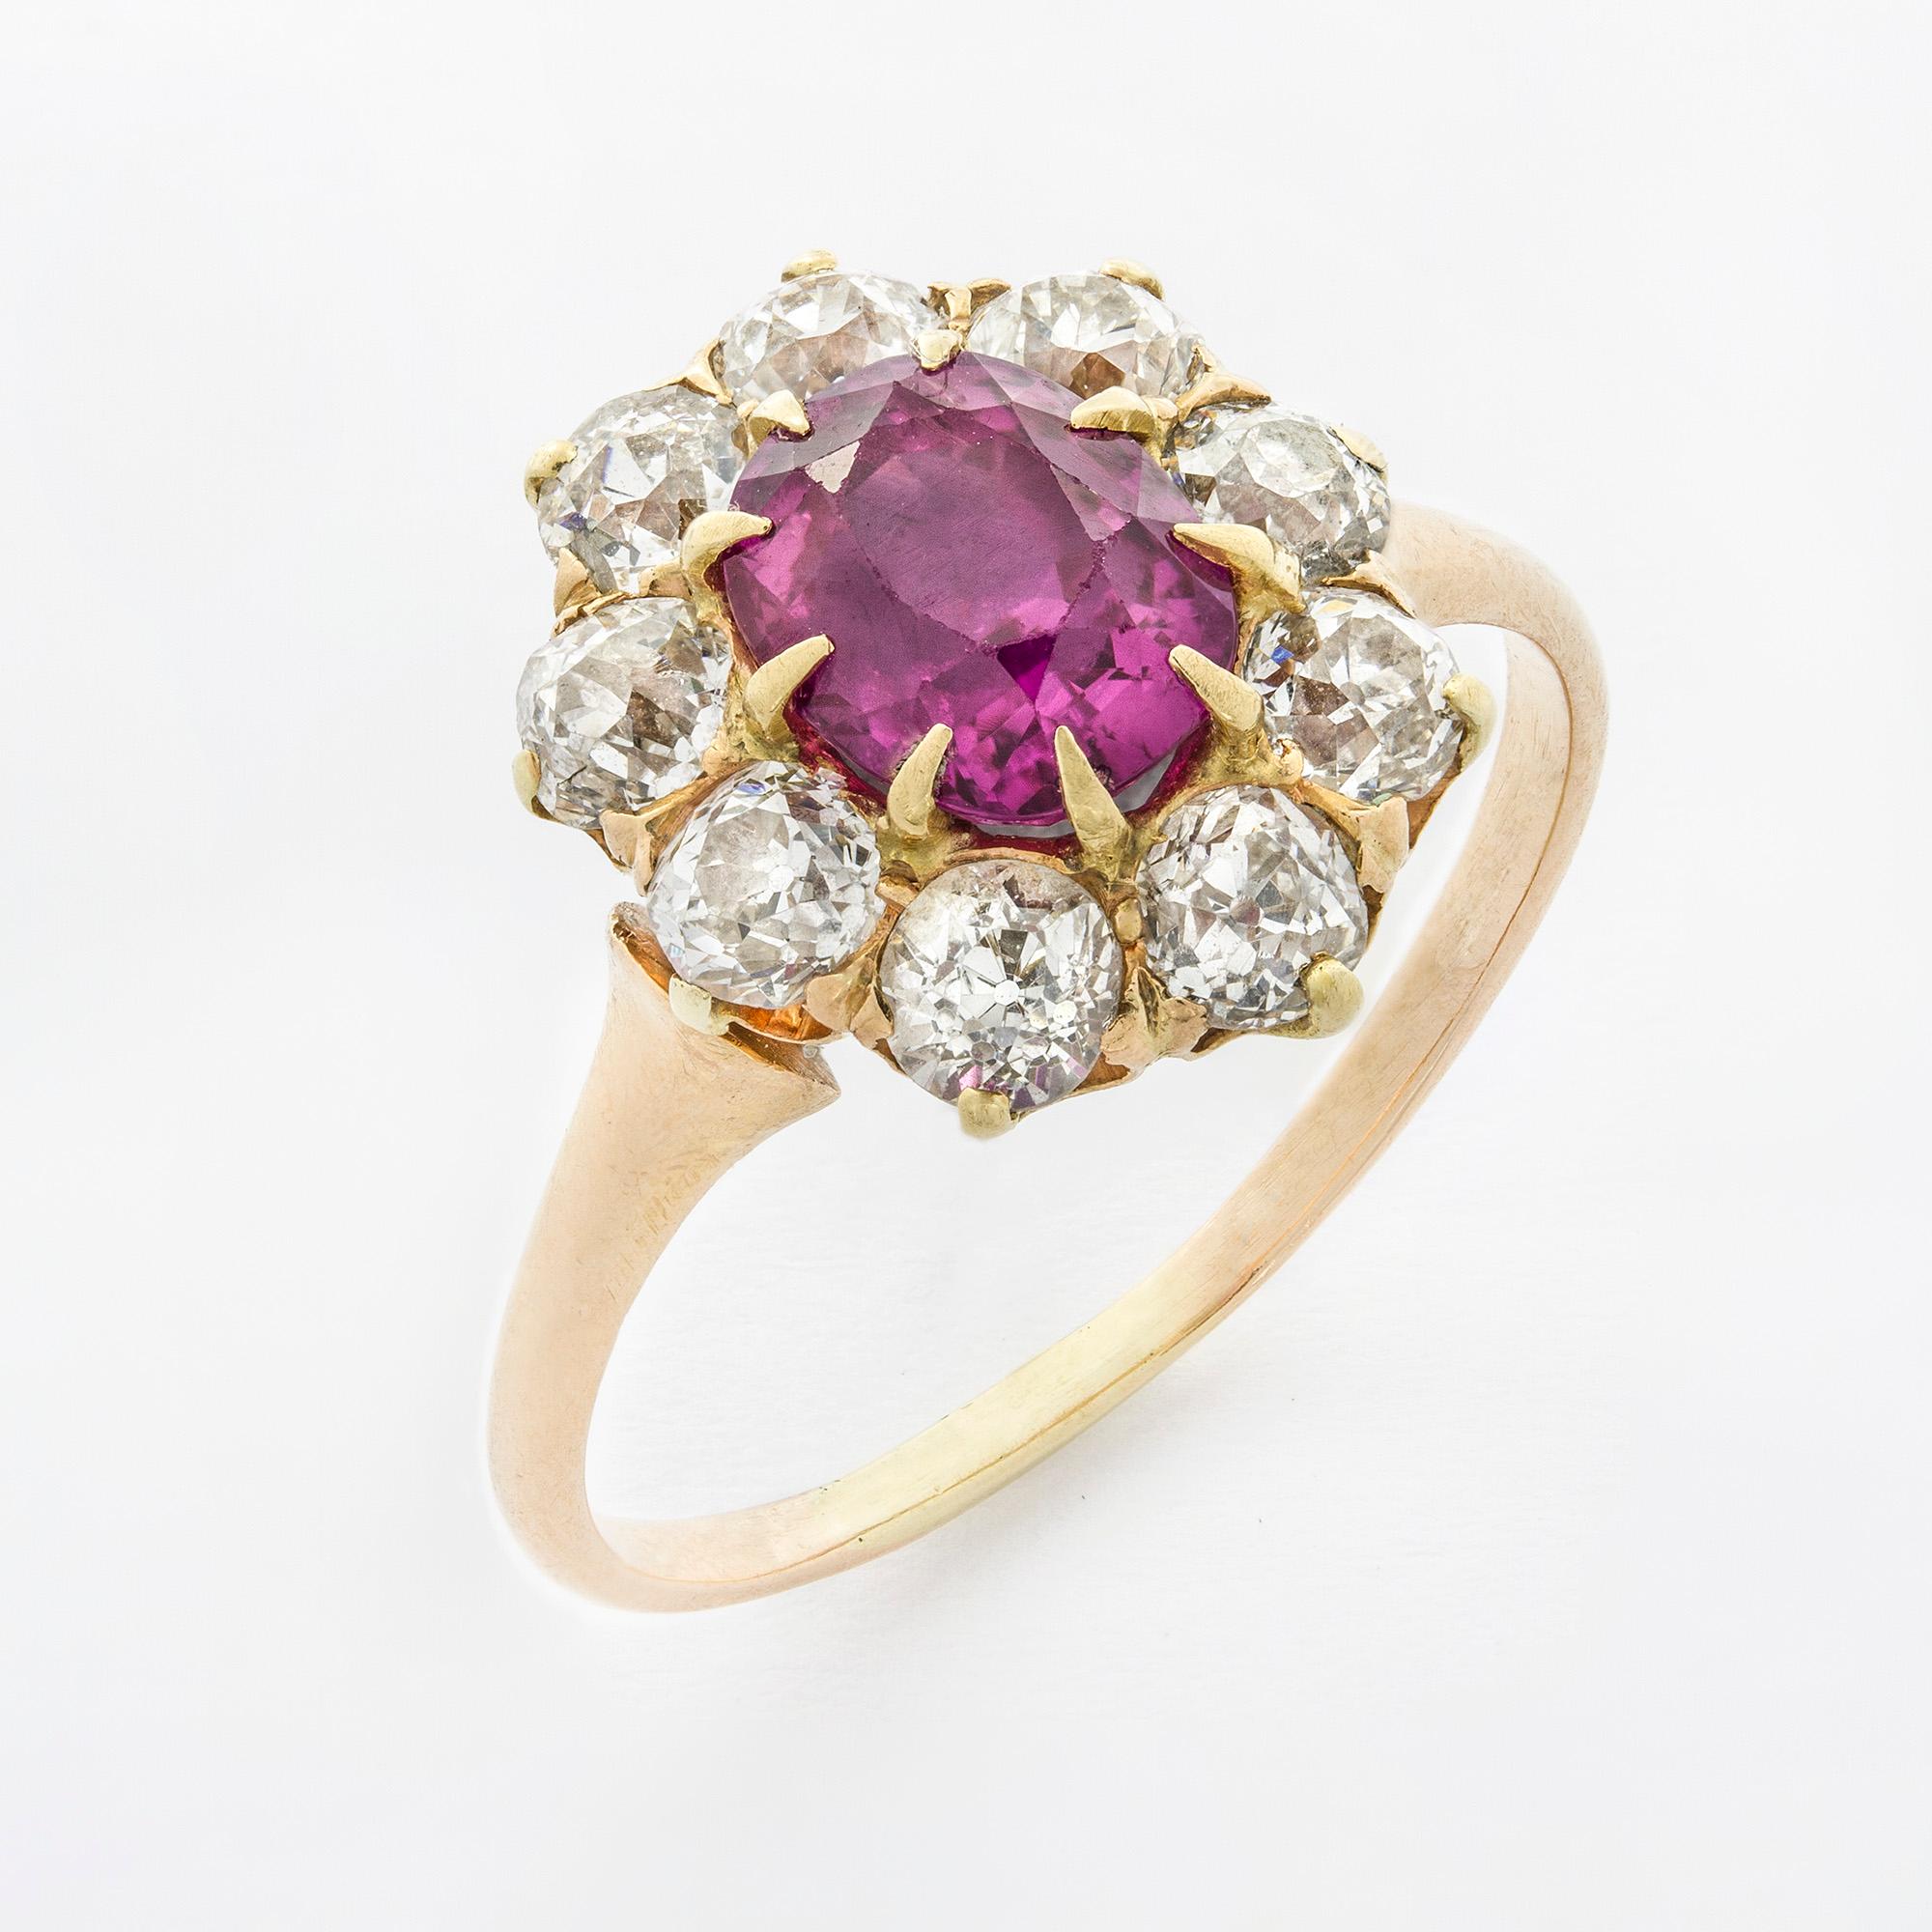 An Edwardian oval ruby and diamond cluster ring, the central oval faceted ruby, estimated to weigh 1.5 carats surrounded by seven old brilliant-cut diamonds, estimated to weigh a total of 1.15 carats, all claw set to a gold mount with tapering